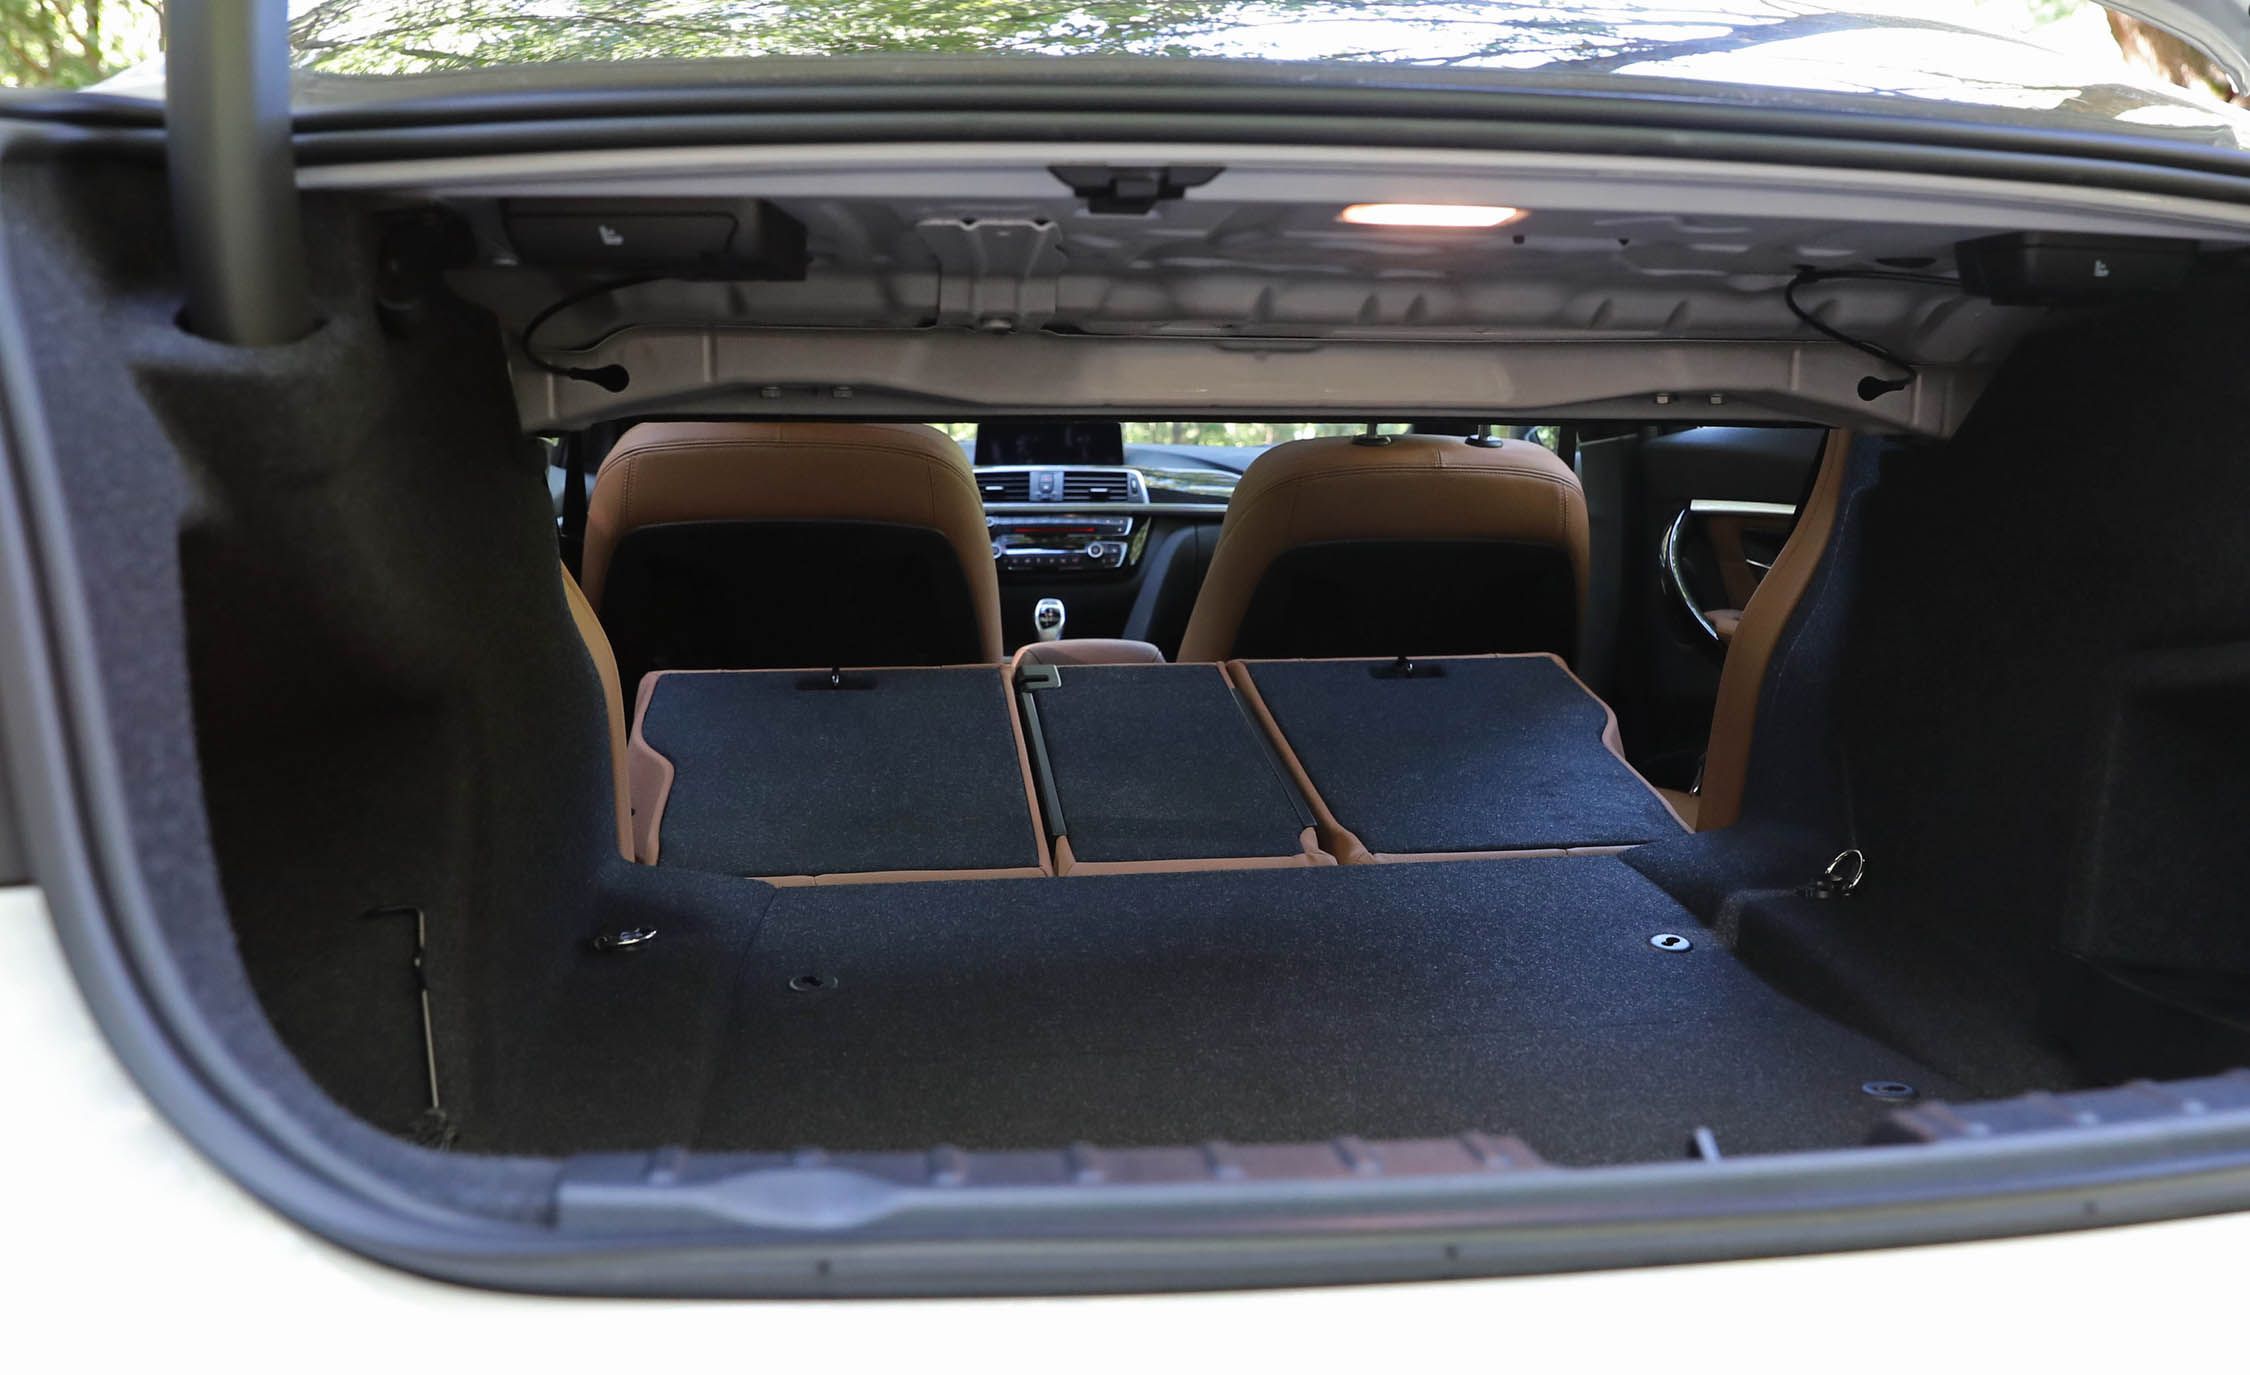 2017 Bmw 330i Interior View Cargo Trunk Seats Folded (View 18 of 59)